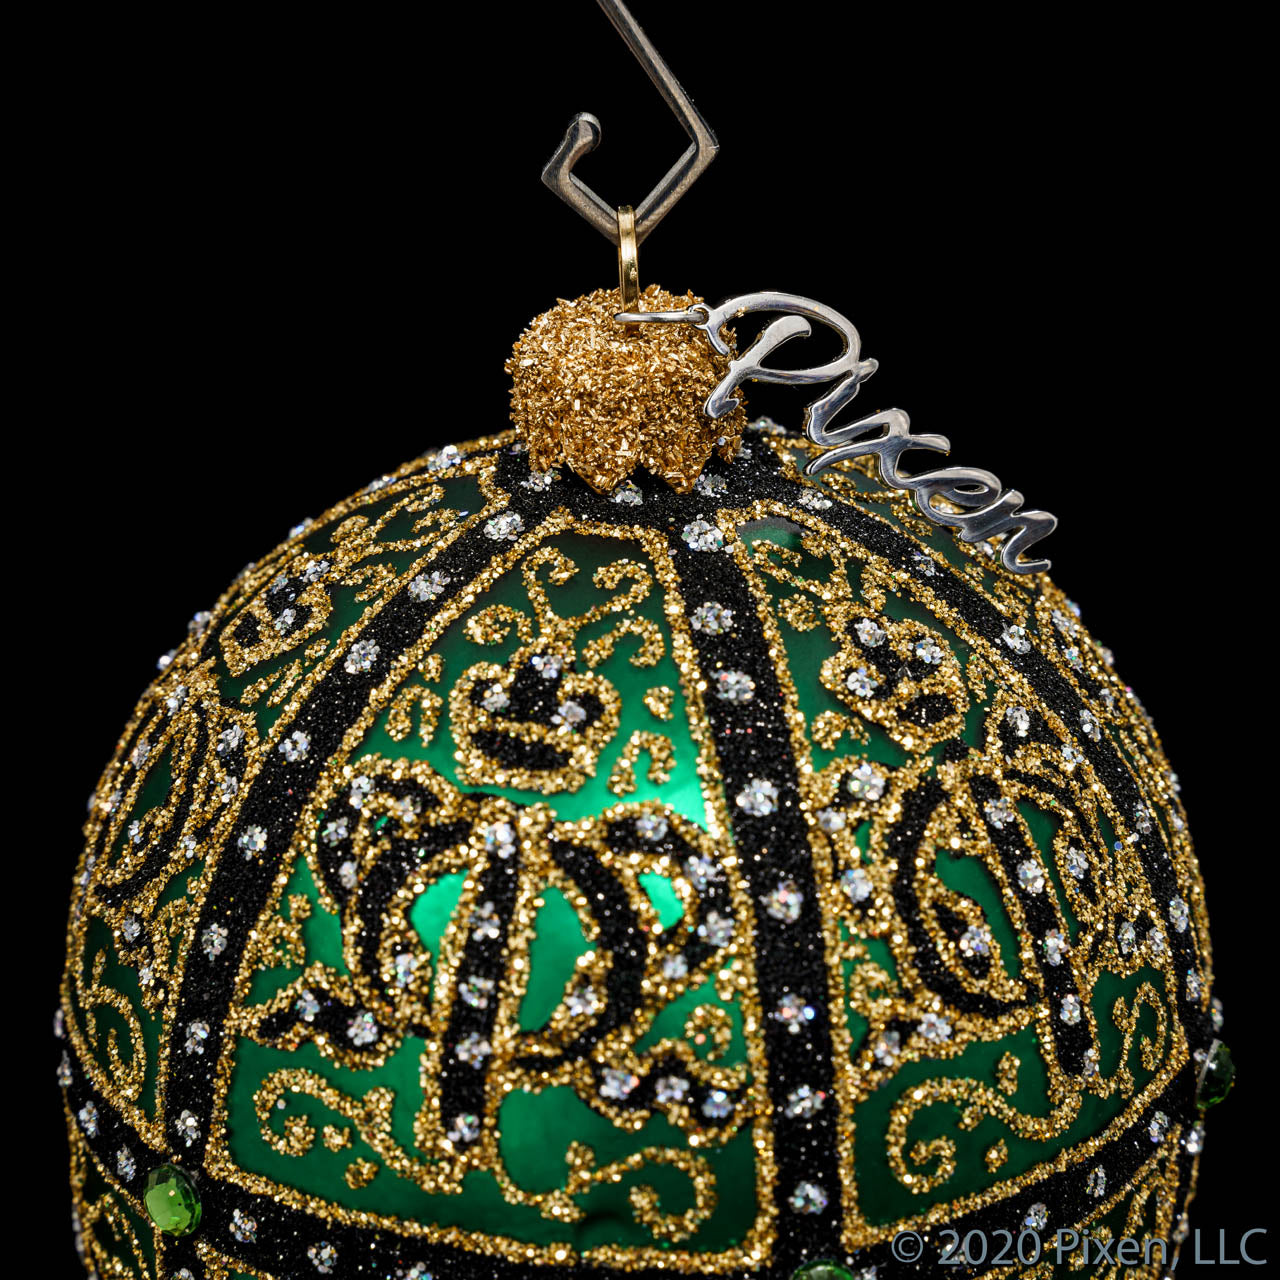 Enigma Glass Ornament in Green by Pixen